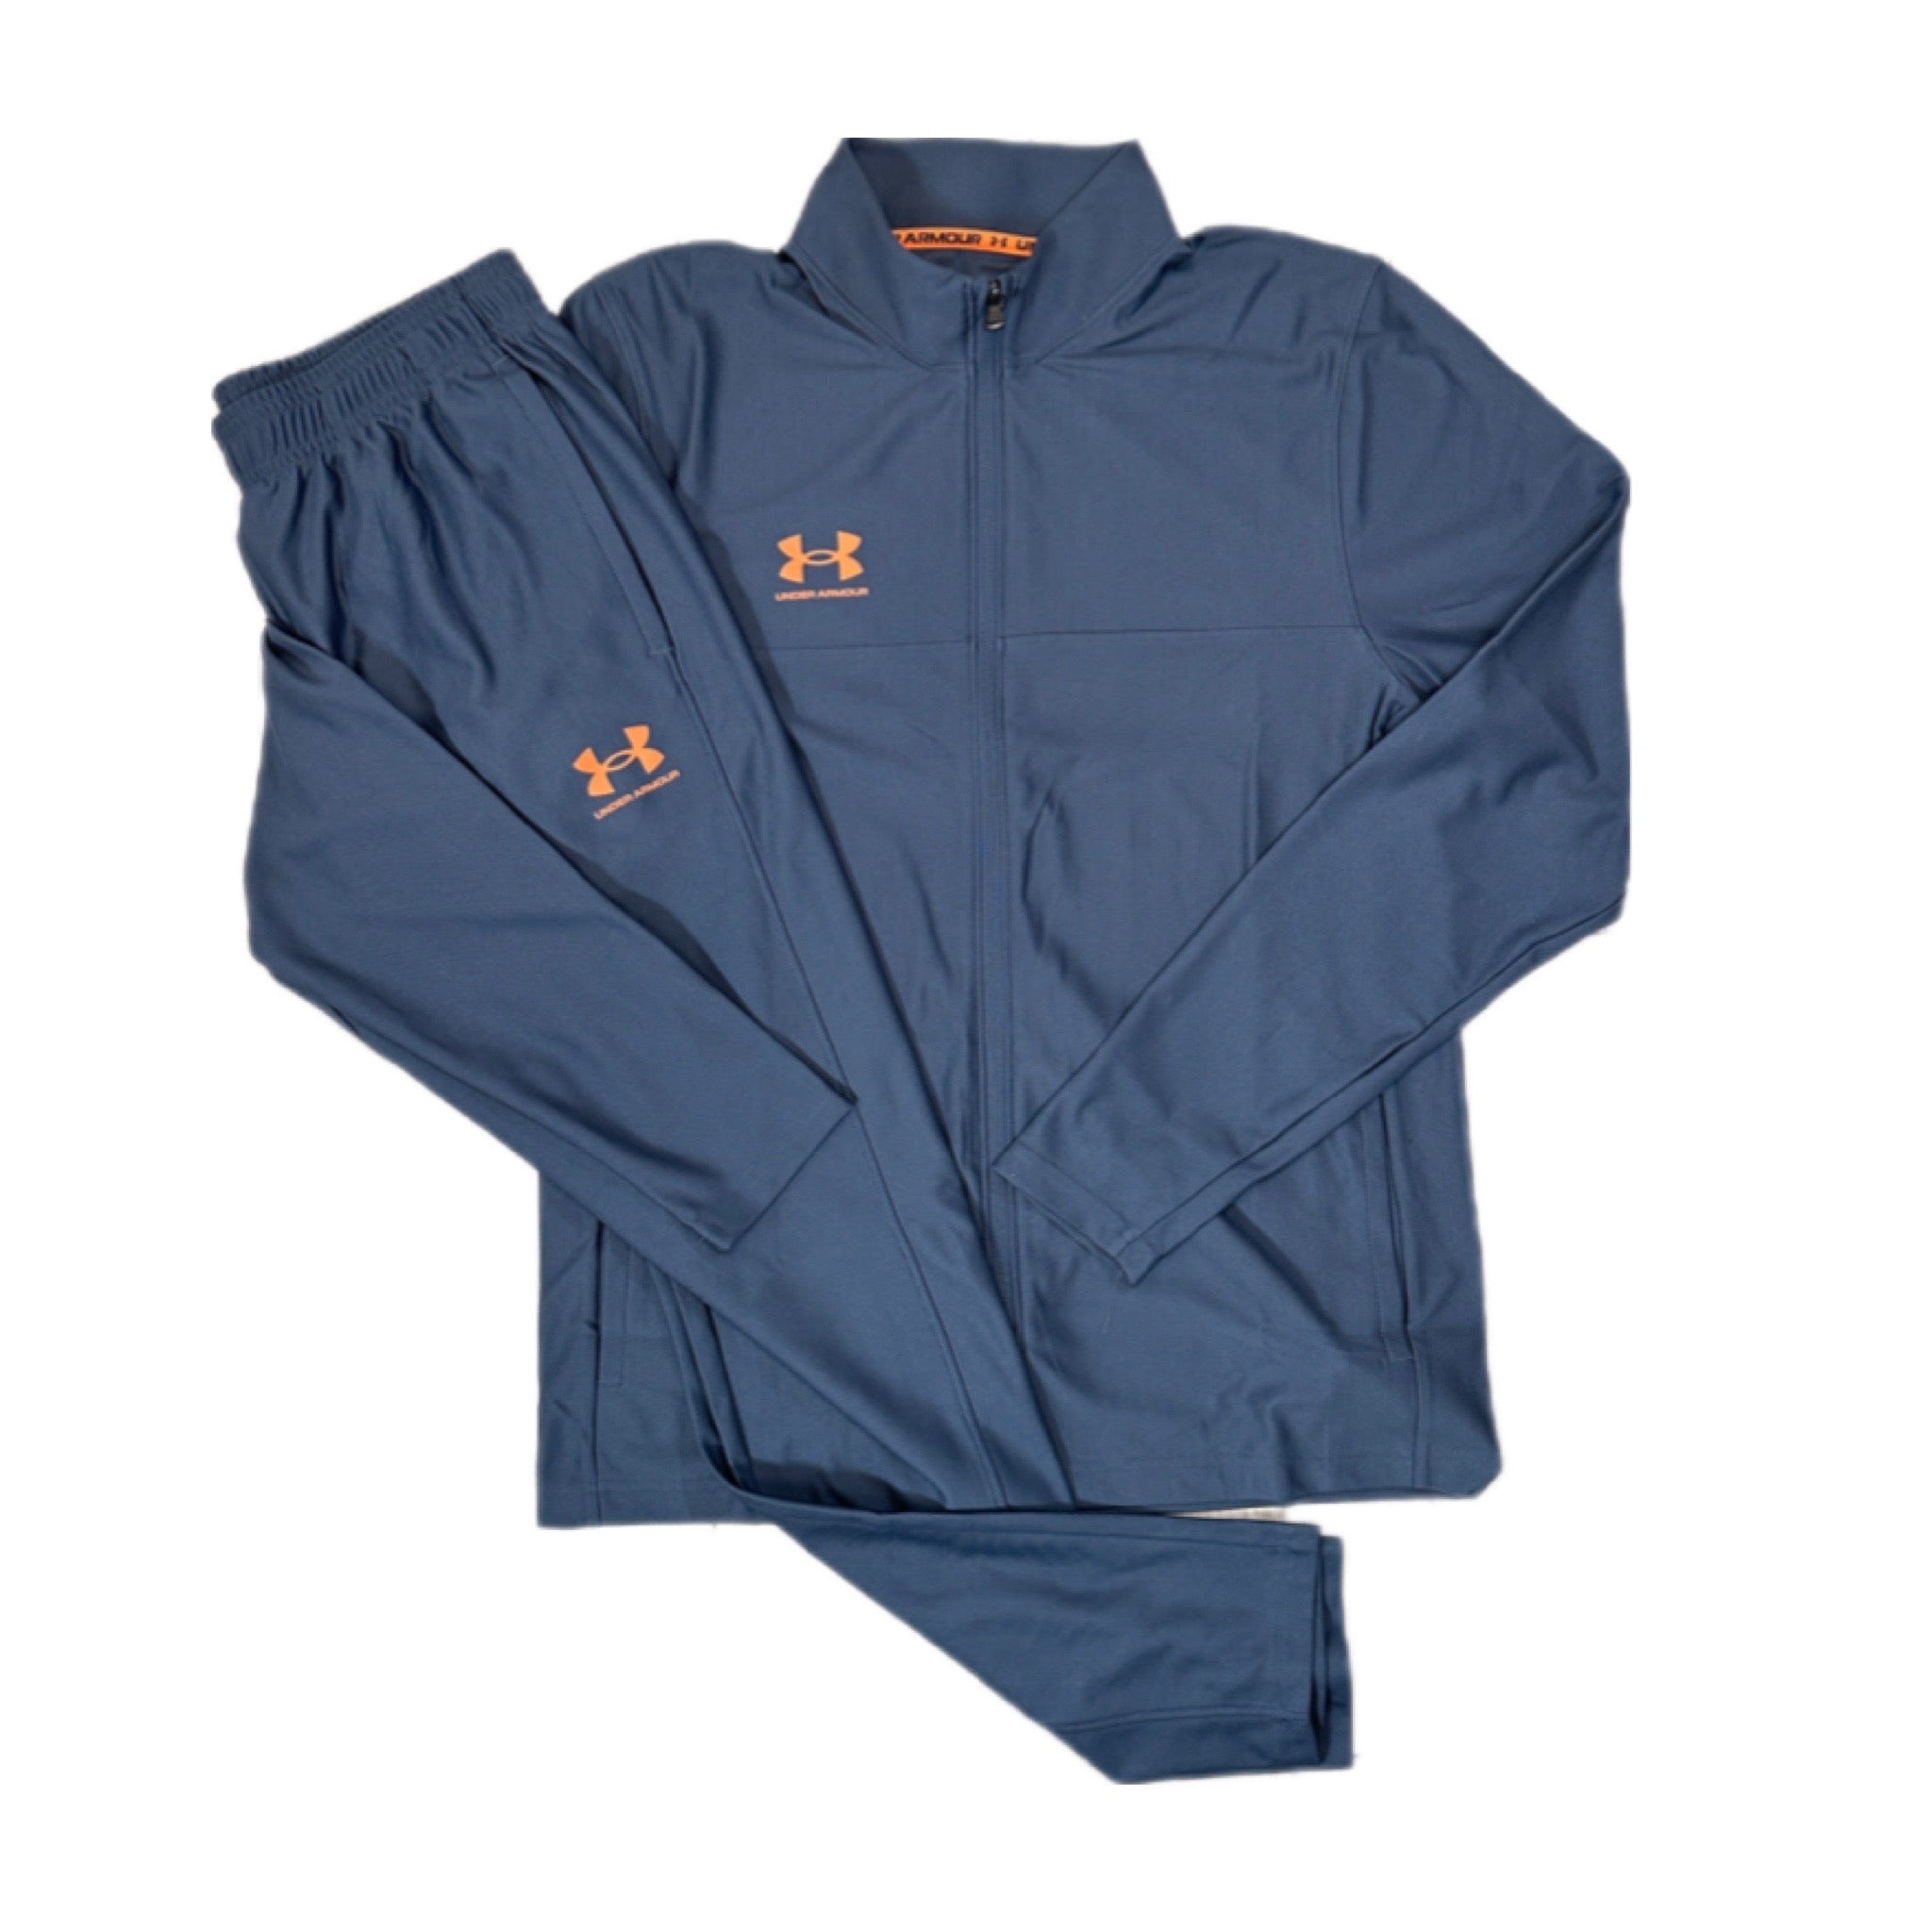 Under Armour Challenger tracksuit in navy